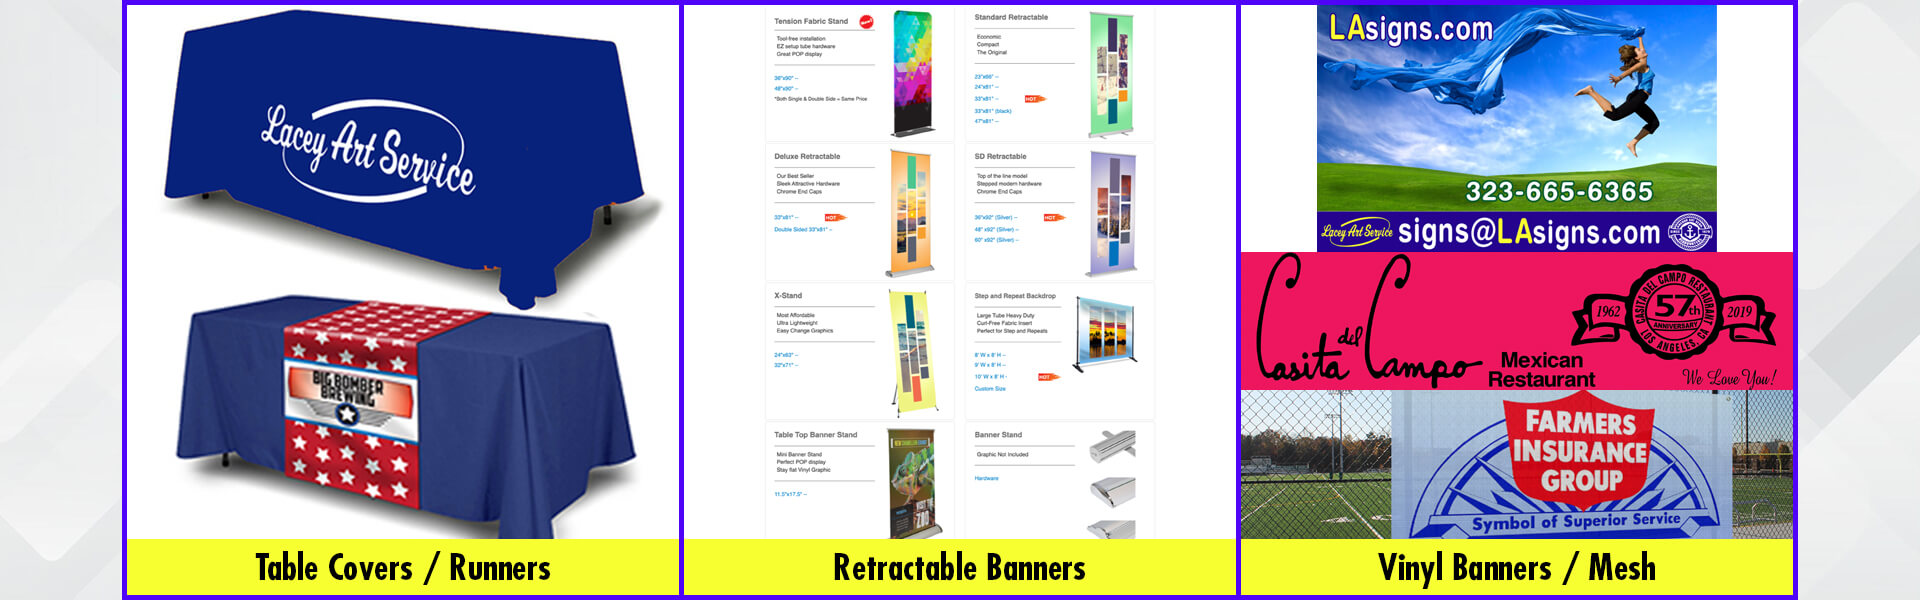 LA signs - Print Outdoor and Custom Banners in Los Angeles